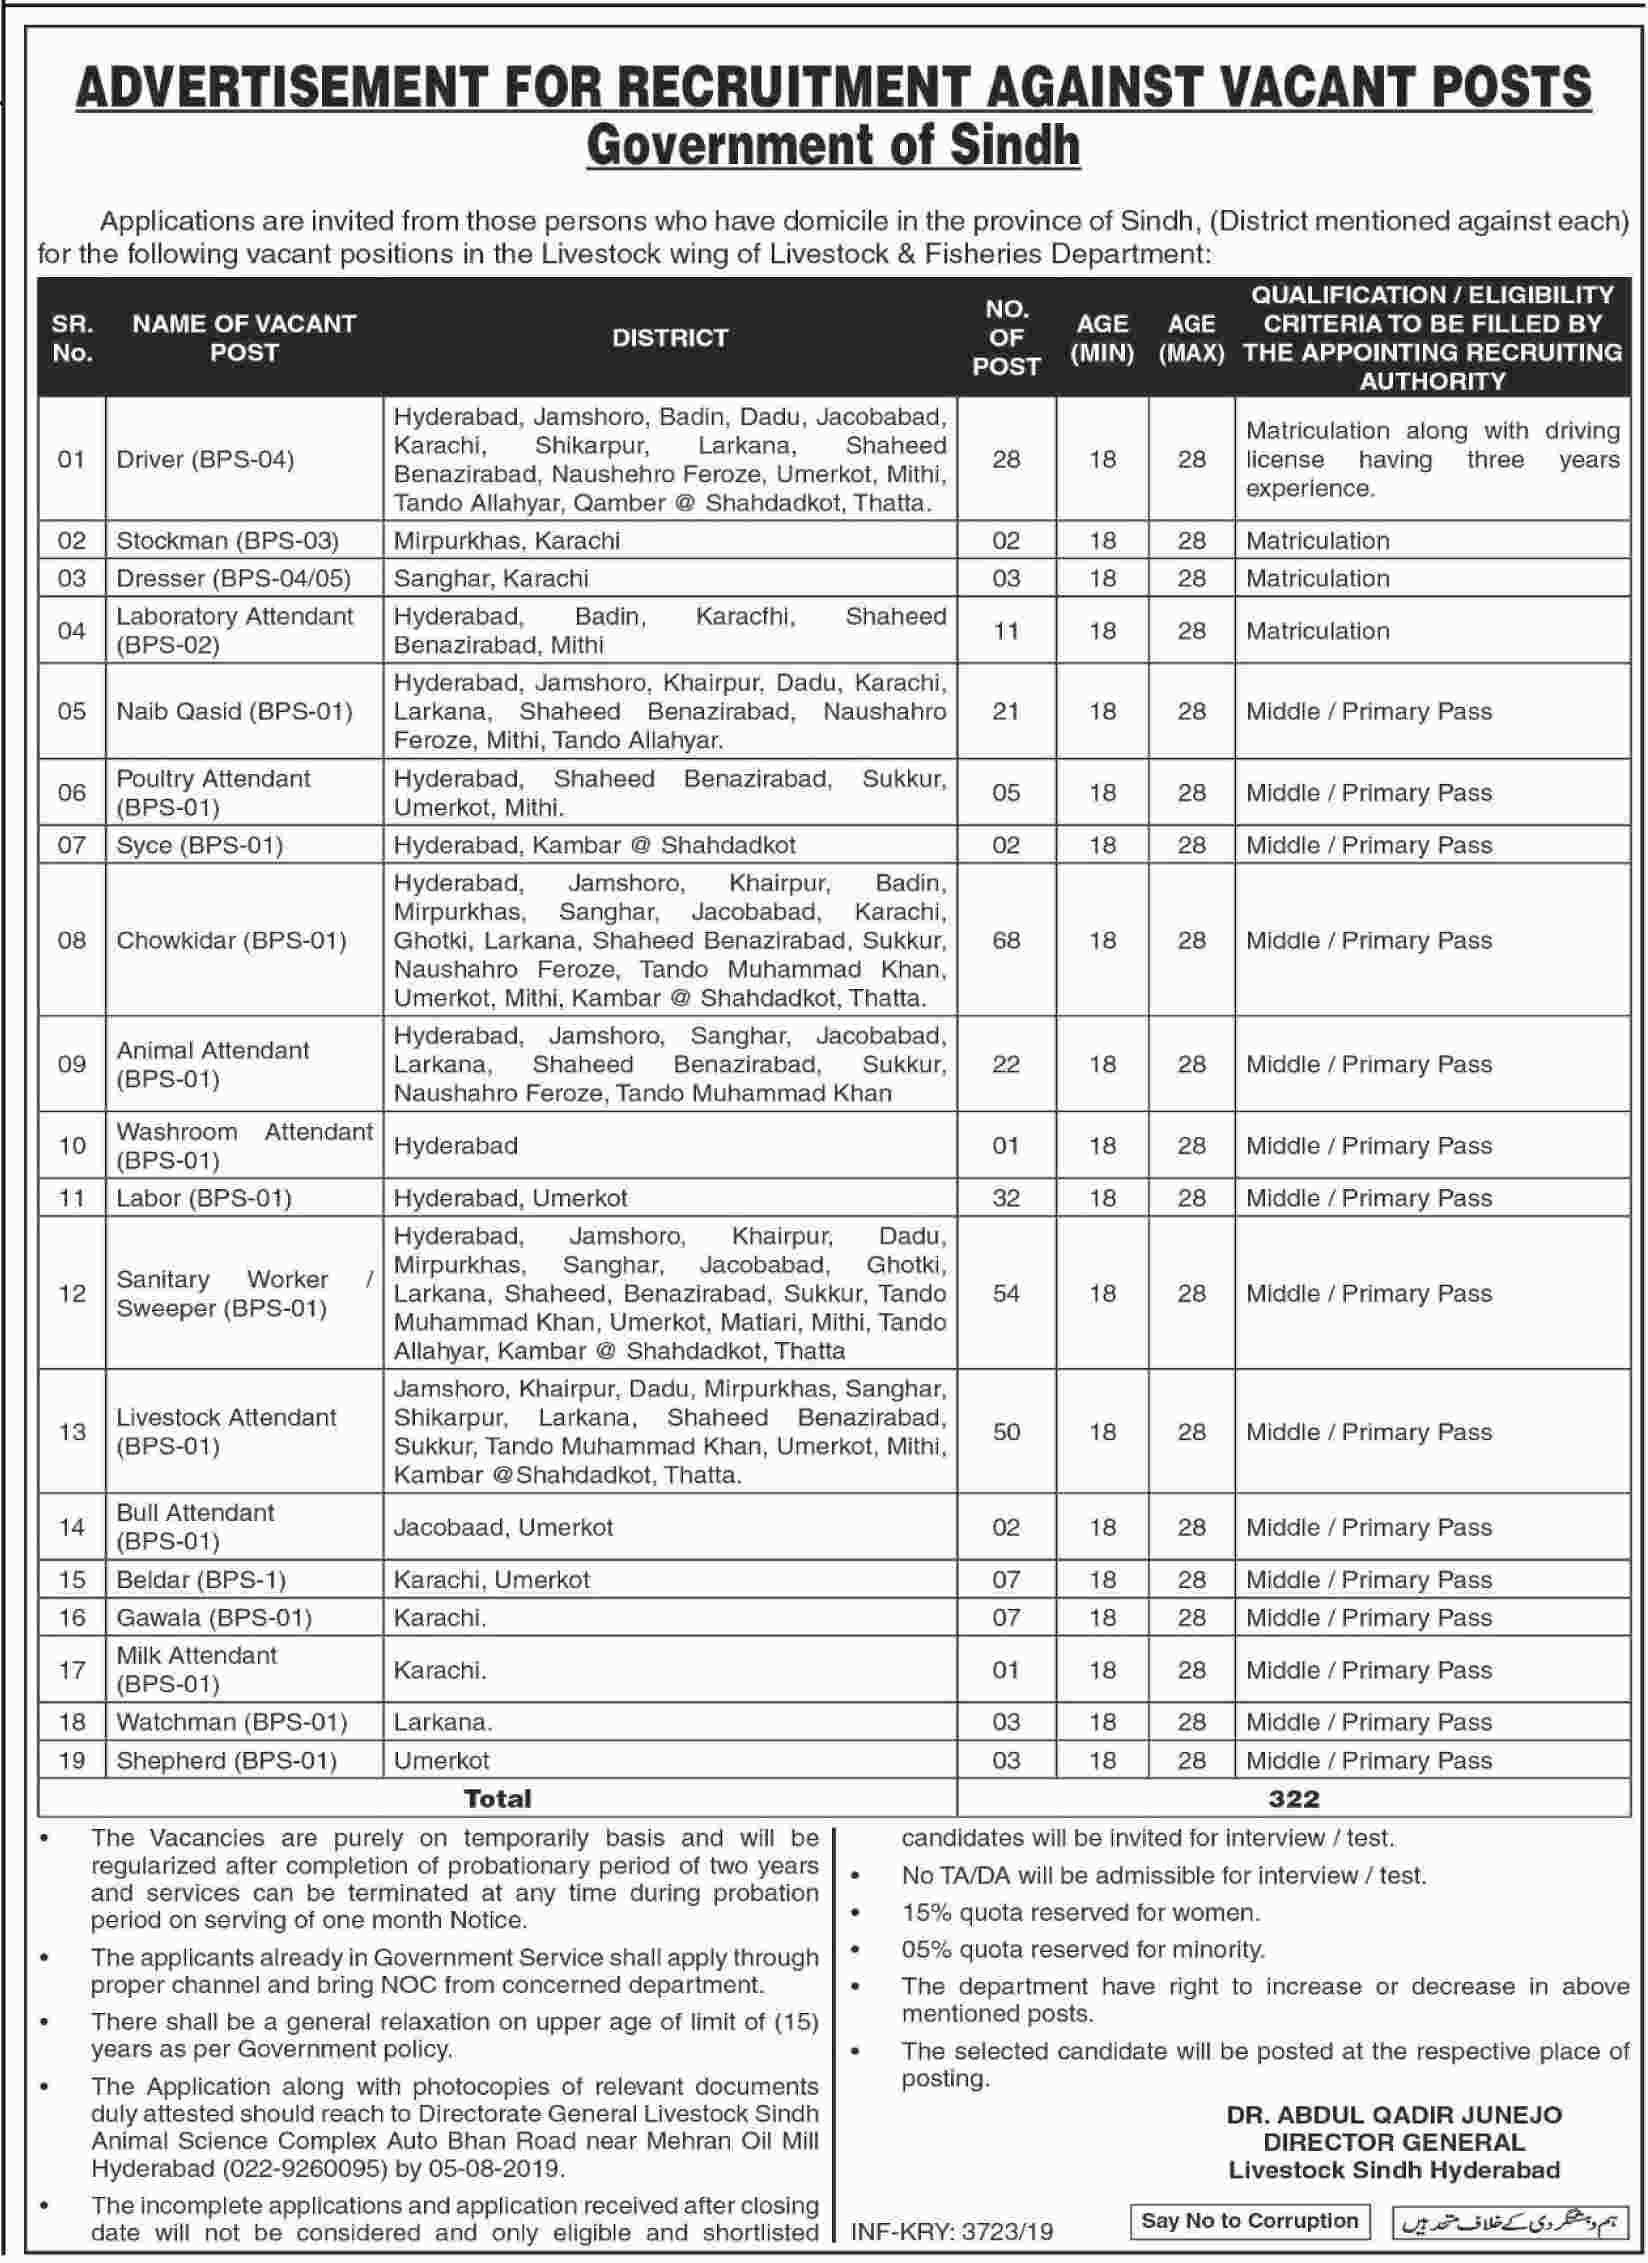 Govt of Sindh Livestock and Fisheries Department jobs 2019